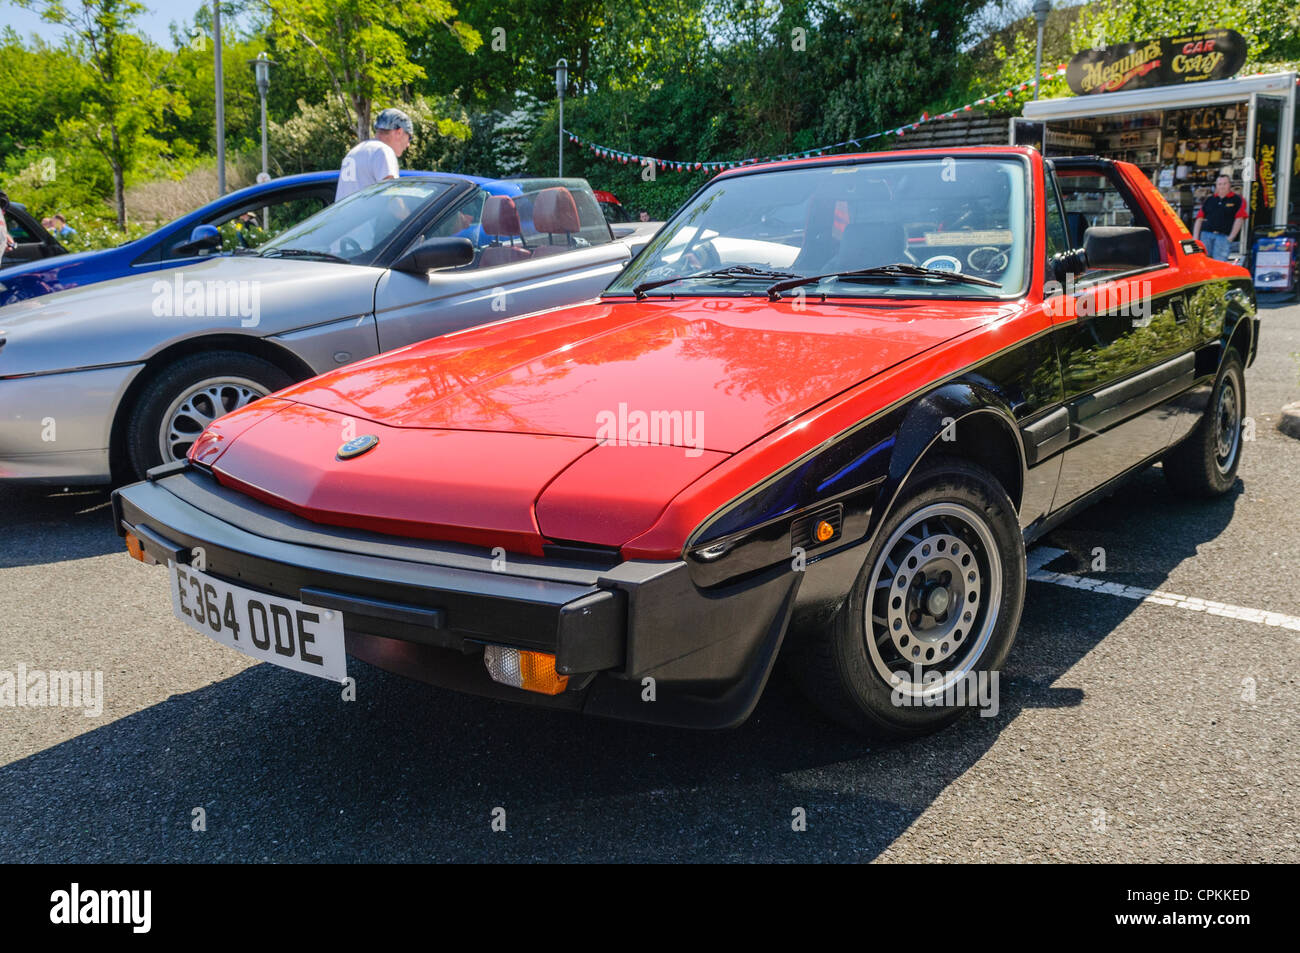 1985 or 1986 Fiat X1/9 mid engined sports car Stock Photo